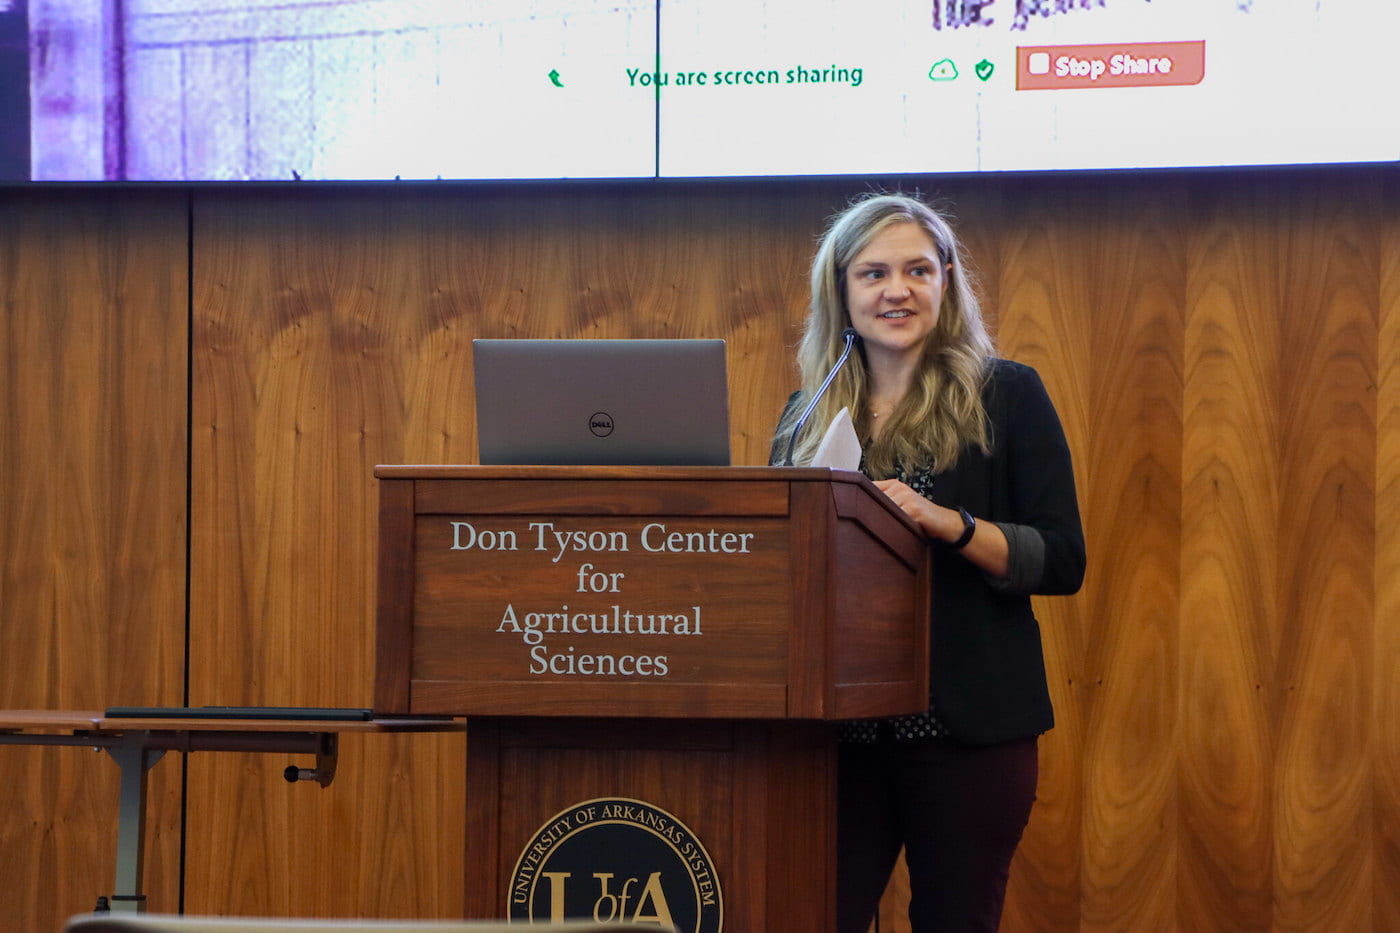 2023 SYMPOSIUM — Shawna Weimer, director of the Center for Food Animal Wellbeing, will host the centers 2023 symposium both virtually and in-person on Sept. 29